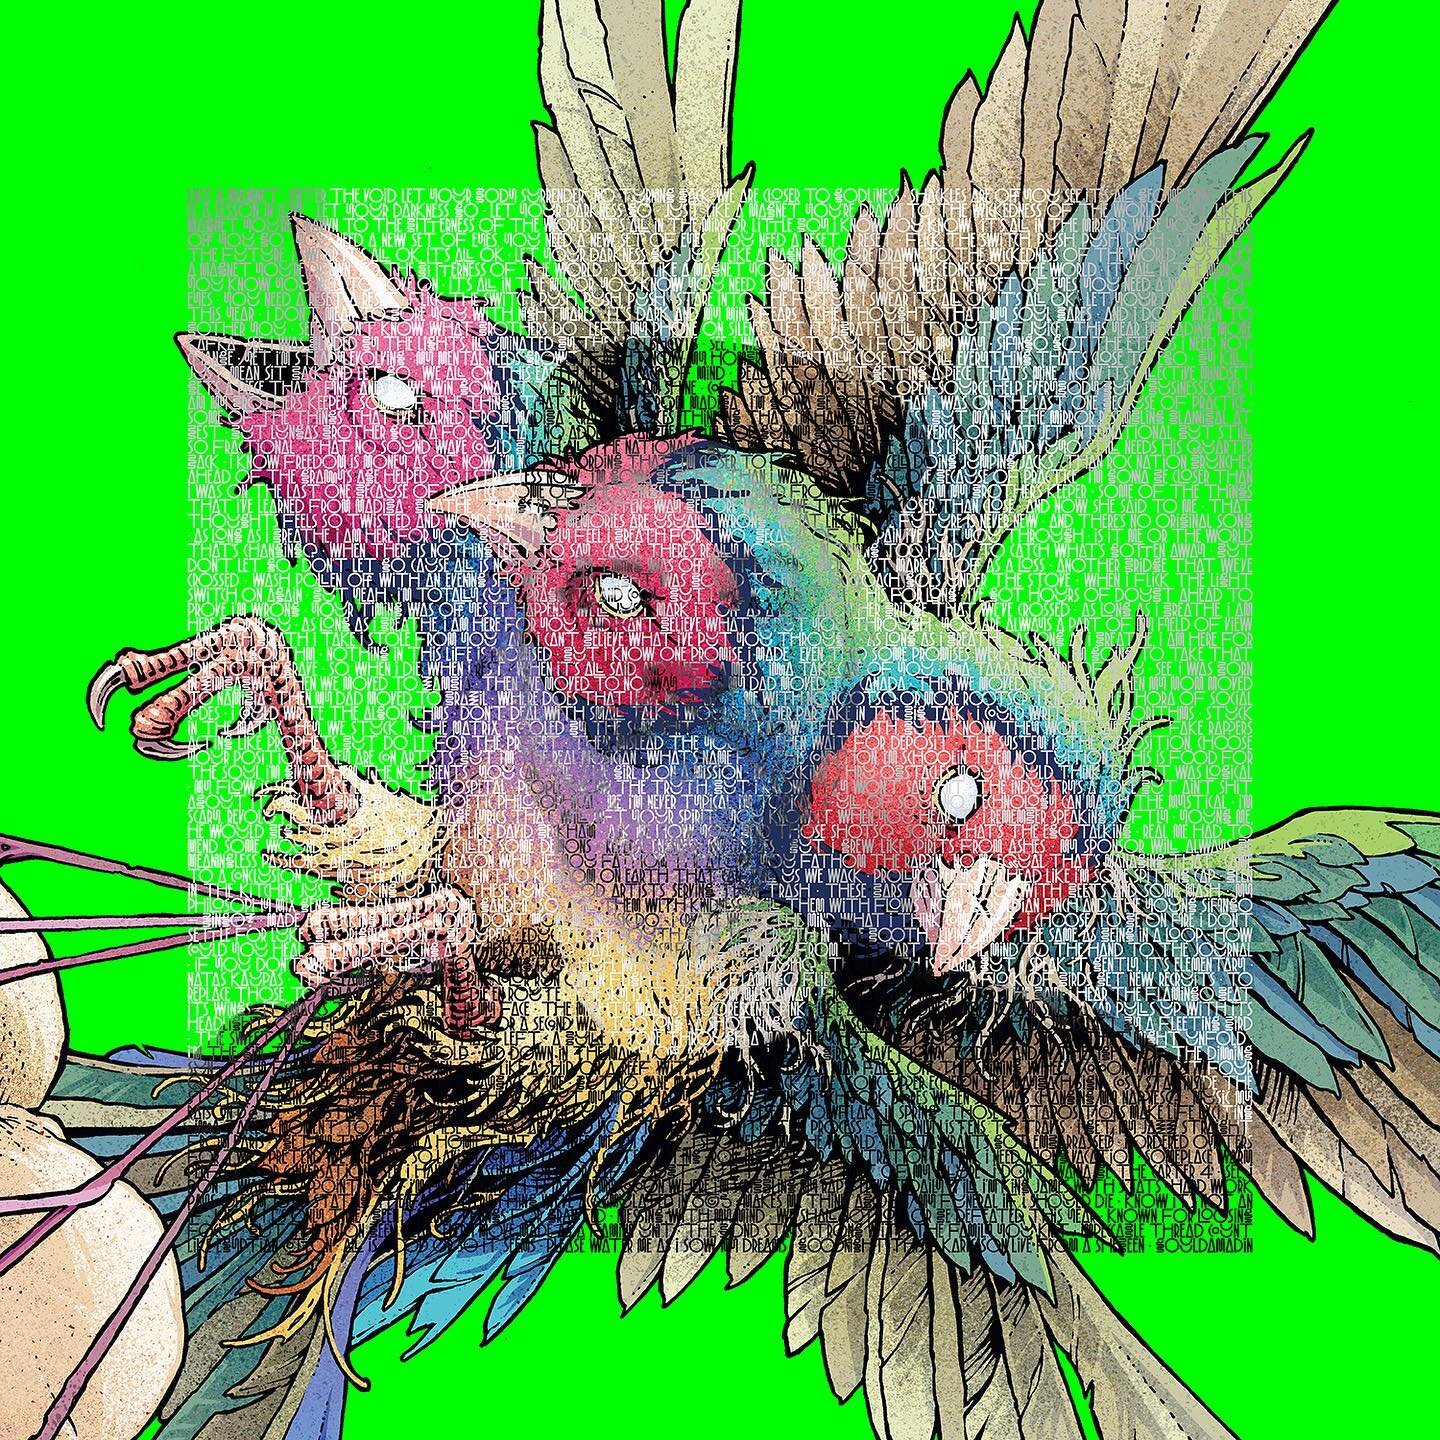 My Gouldian Finch album 'Hatch' is out November 10
You can pre-order LP, CD and MC now 💚
LINK IN BIO
Illustration by Skurktur. Design by Martin Kvamme and myself. PS! This is just the beginning, this is just the frontside :) haha!